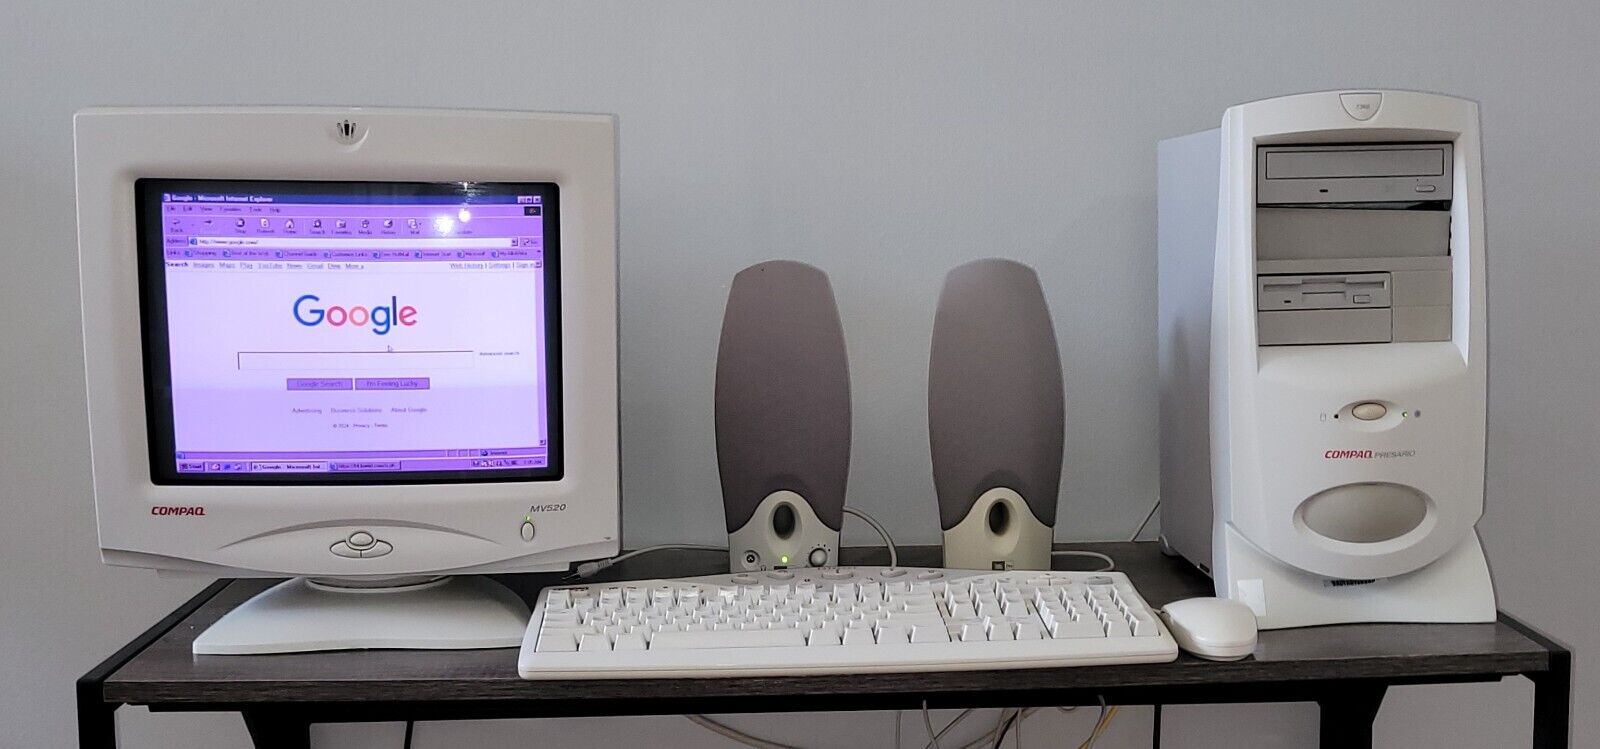 Vintage Compaq MV520 | OEM 7360 PC Monitor Keyboard Speakers Mouse | Win98 IE6